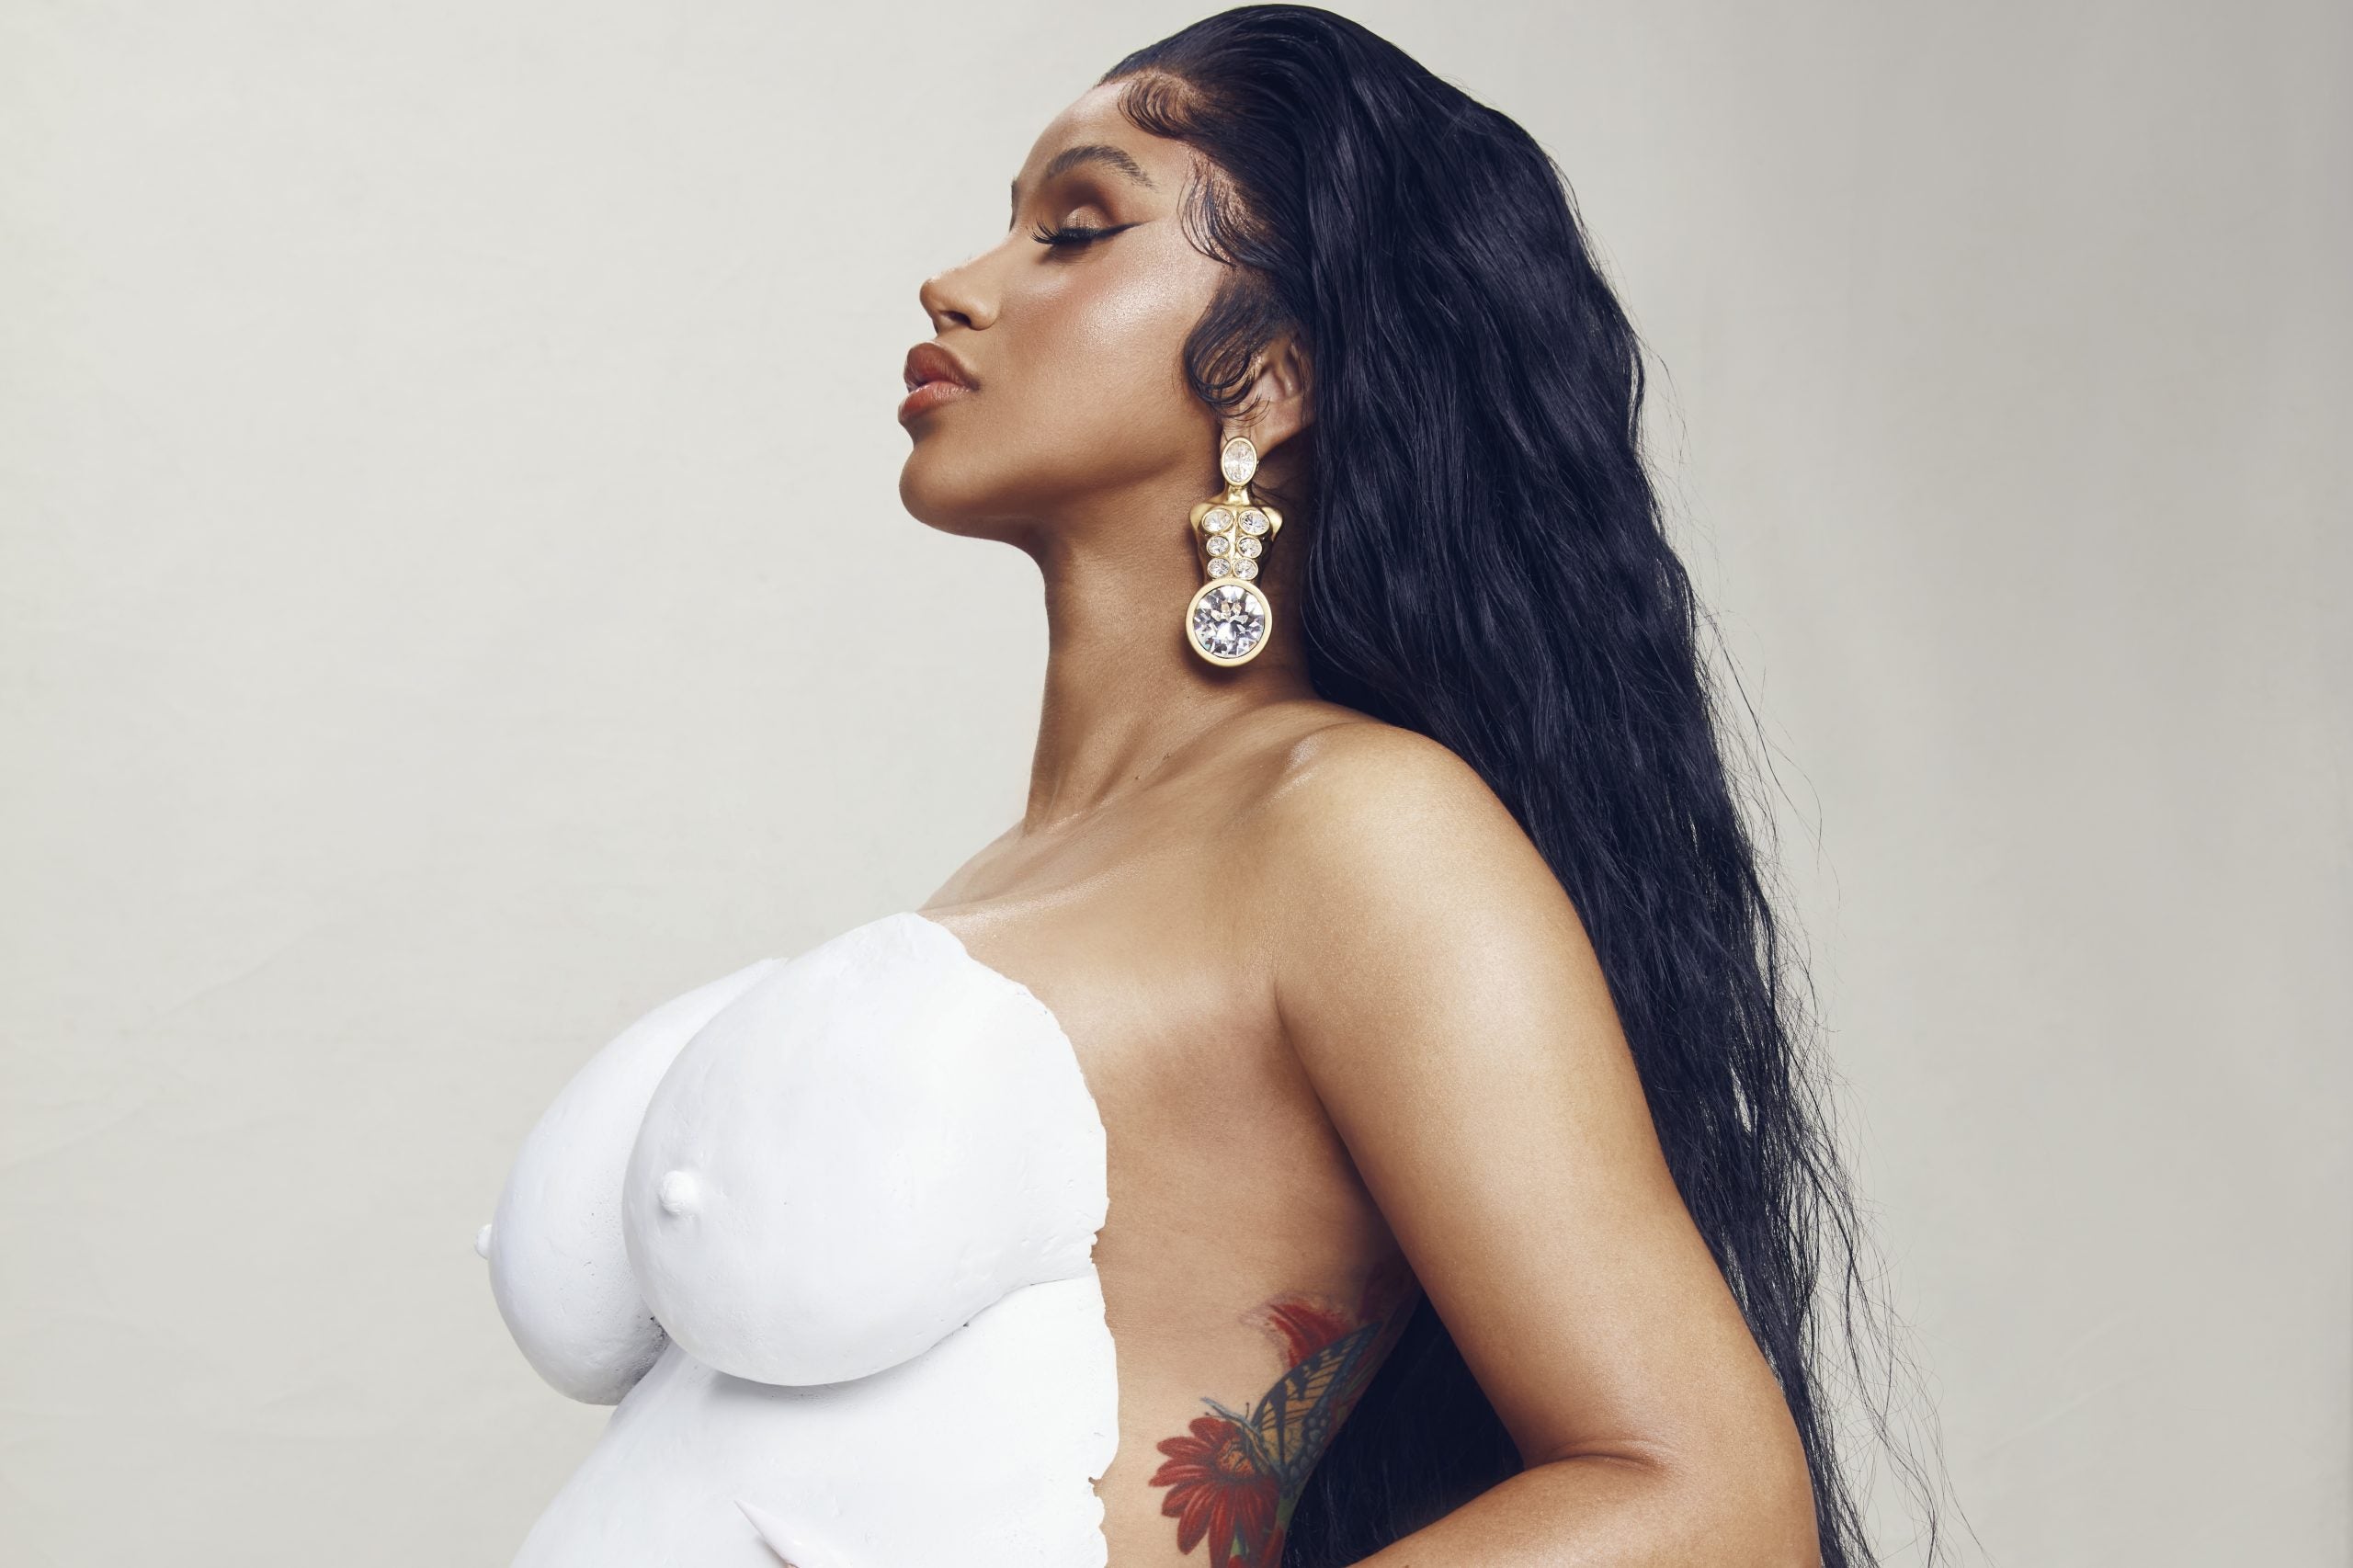 Suprise! Cardi B Is Expecting Baby No. 2 With Husband Offset